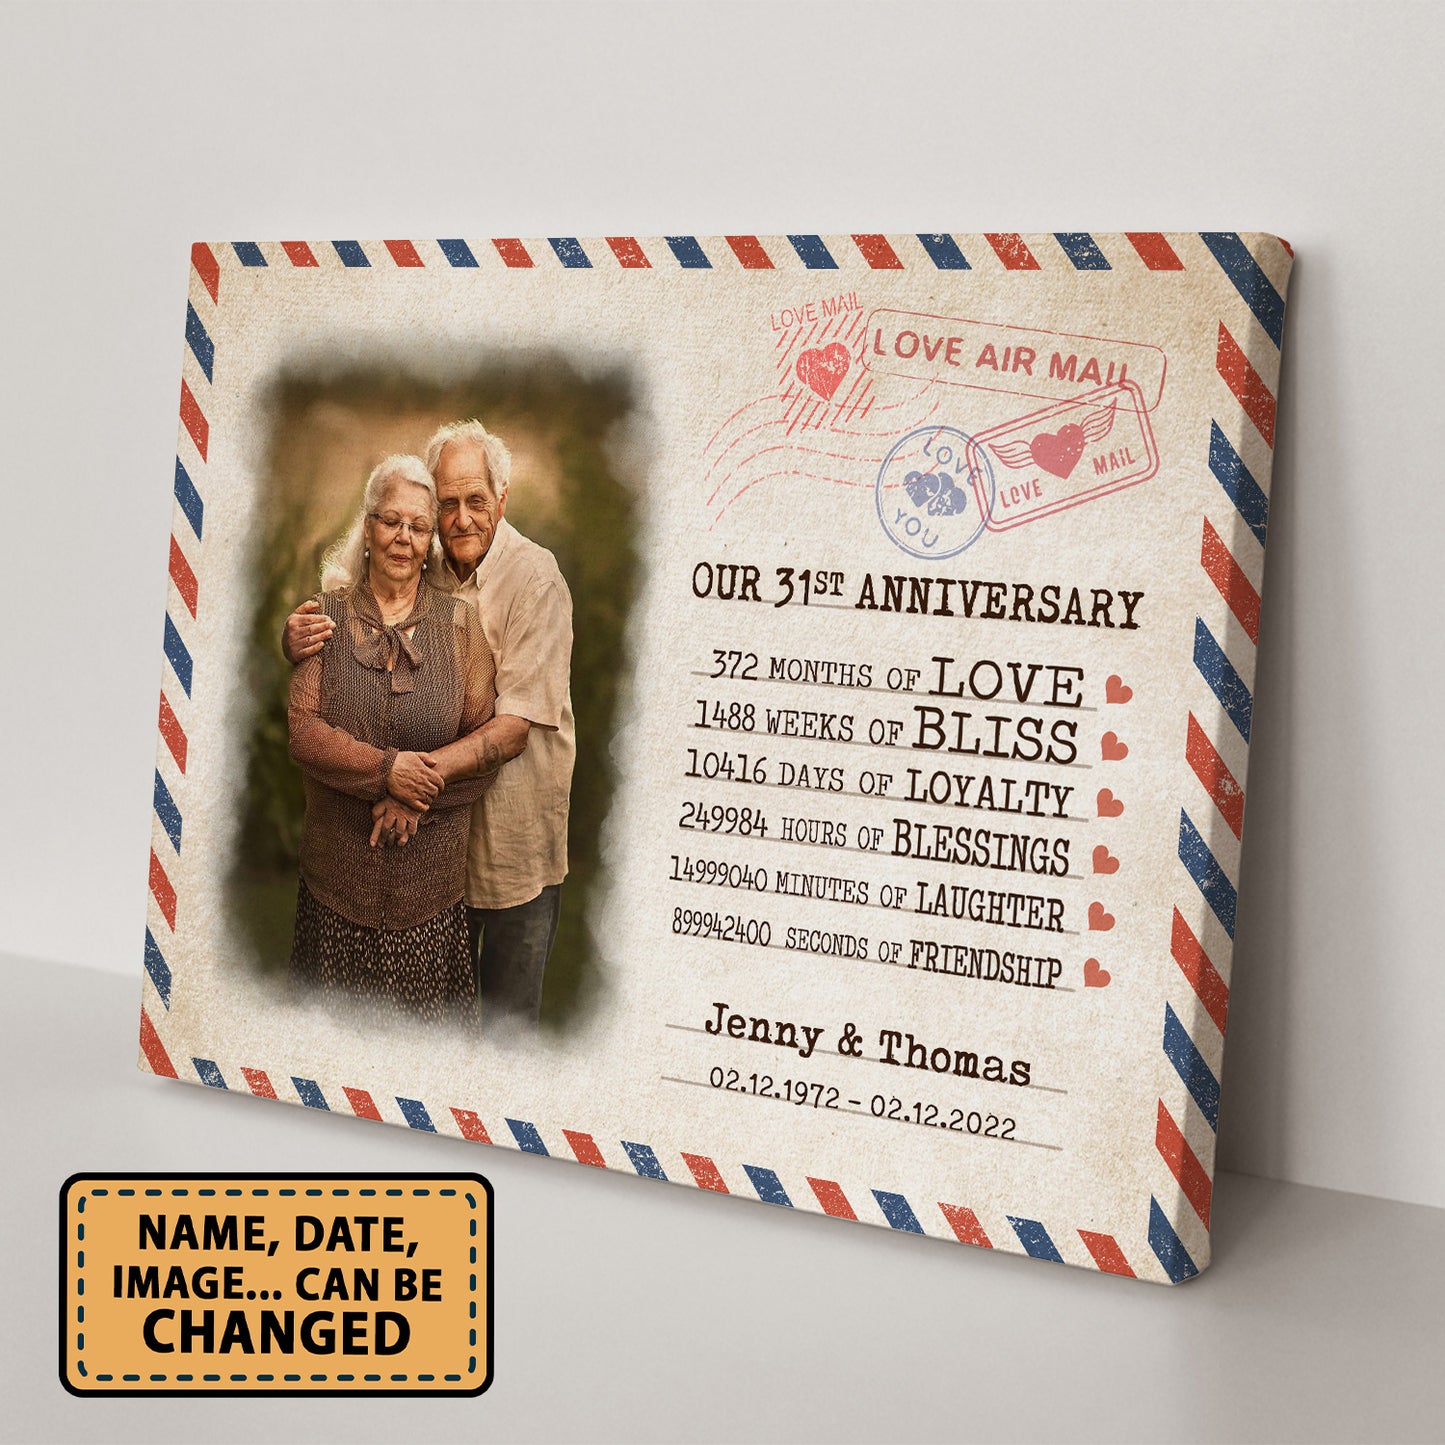 Our 31st Anniversary Letter Valentine Gift Personalized Canvas